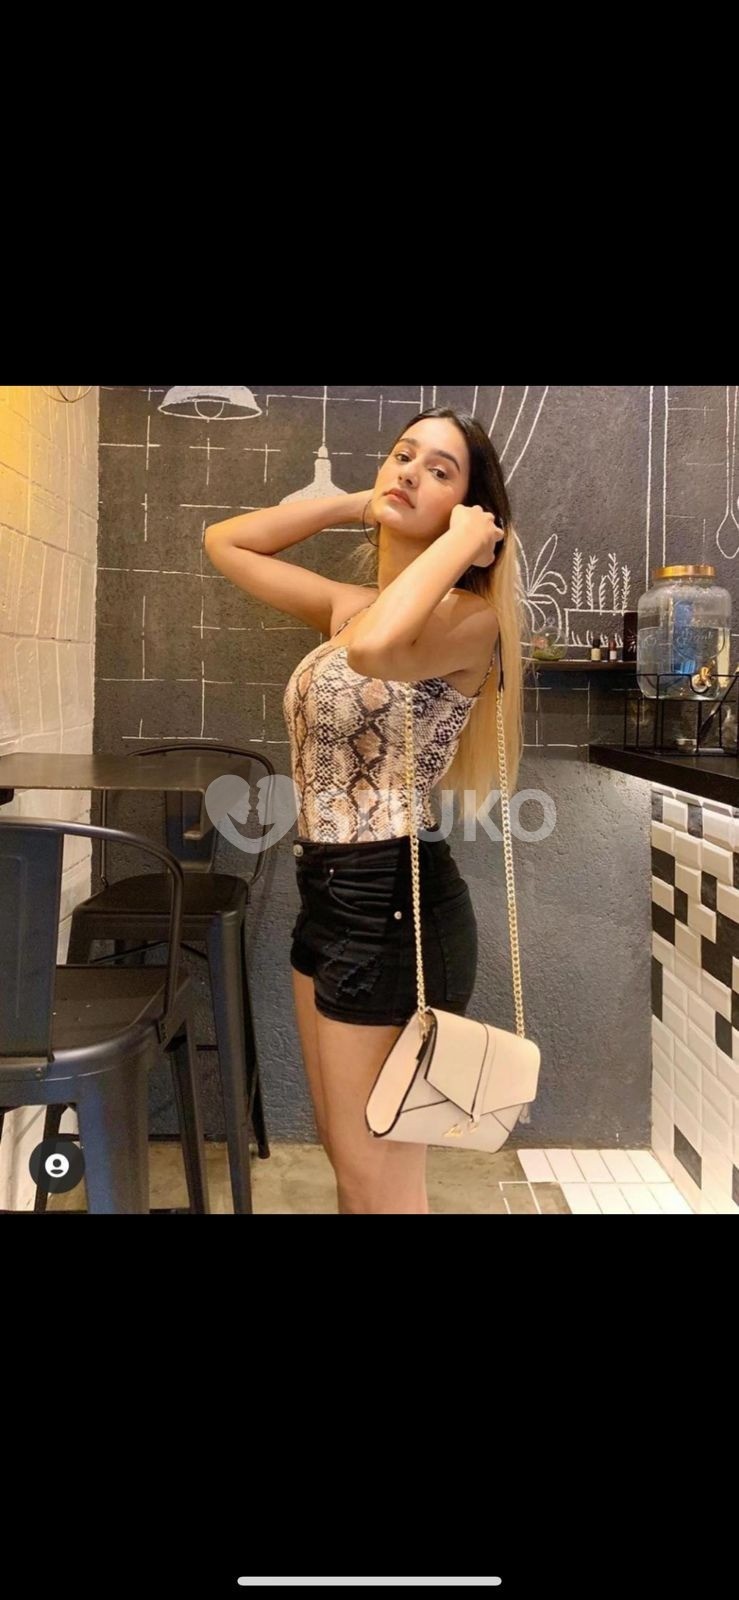 PARK STREET (KOLKATA)VIP📞BEST HIGH PROFILE CALL GIRL FOR SEX AND SATISFACTION CALL ME NOW 📞